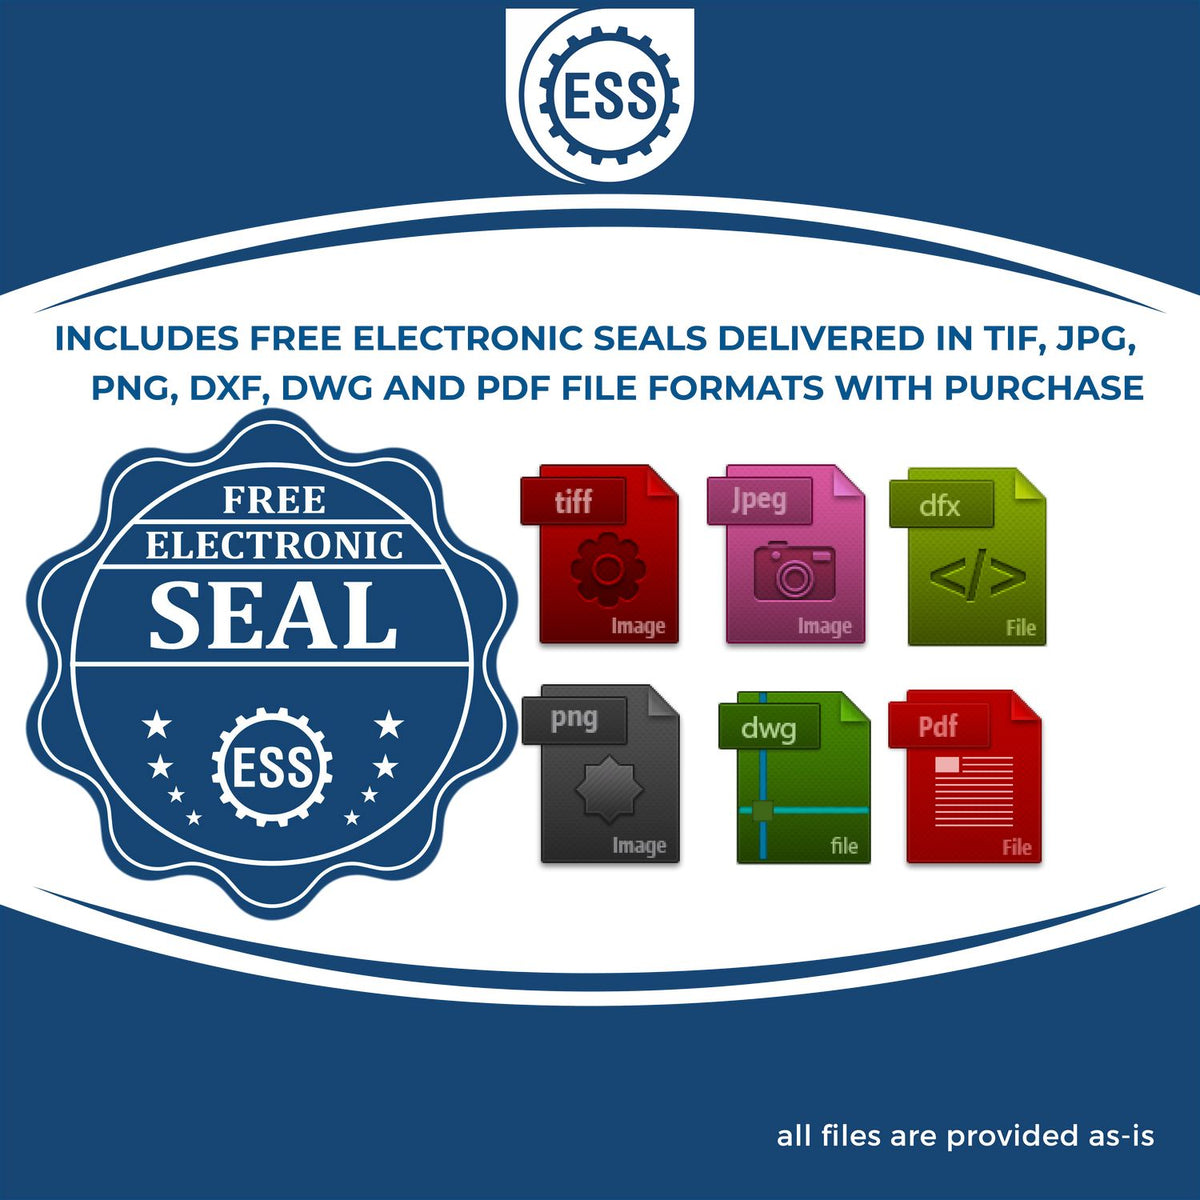 An infographic for the free electronic seal for the Handheld New York Professional Geologist Embosser illustrating the different file type icons such as DXF, DWG, TIF, JPG and PNG.